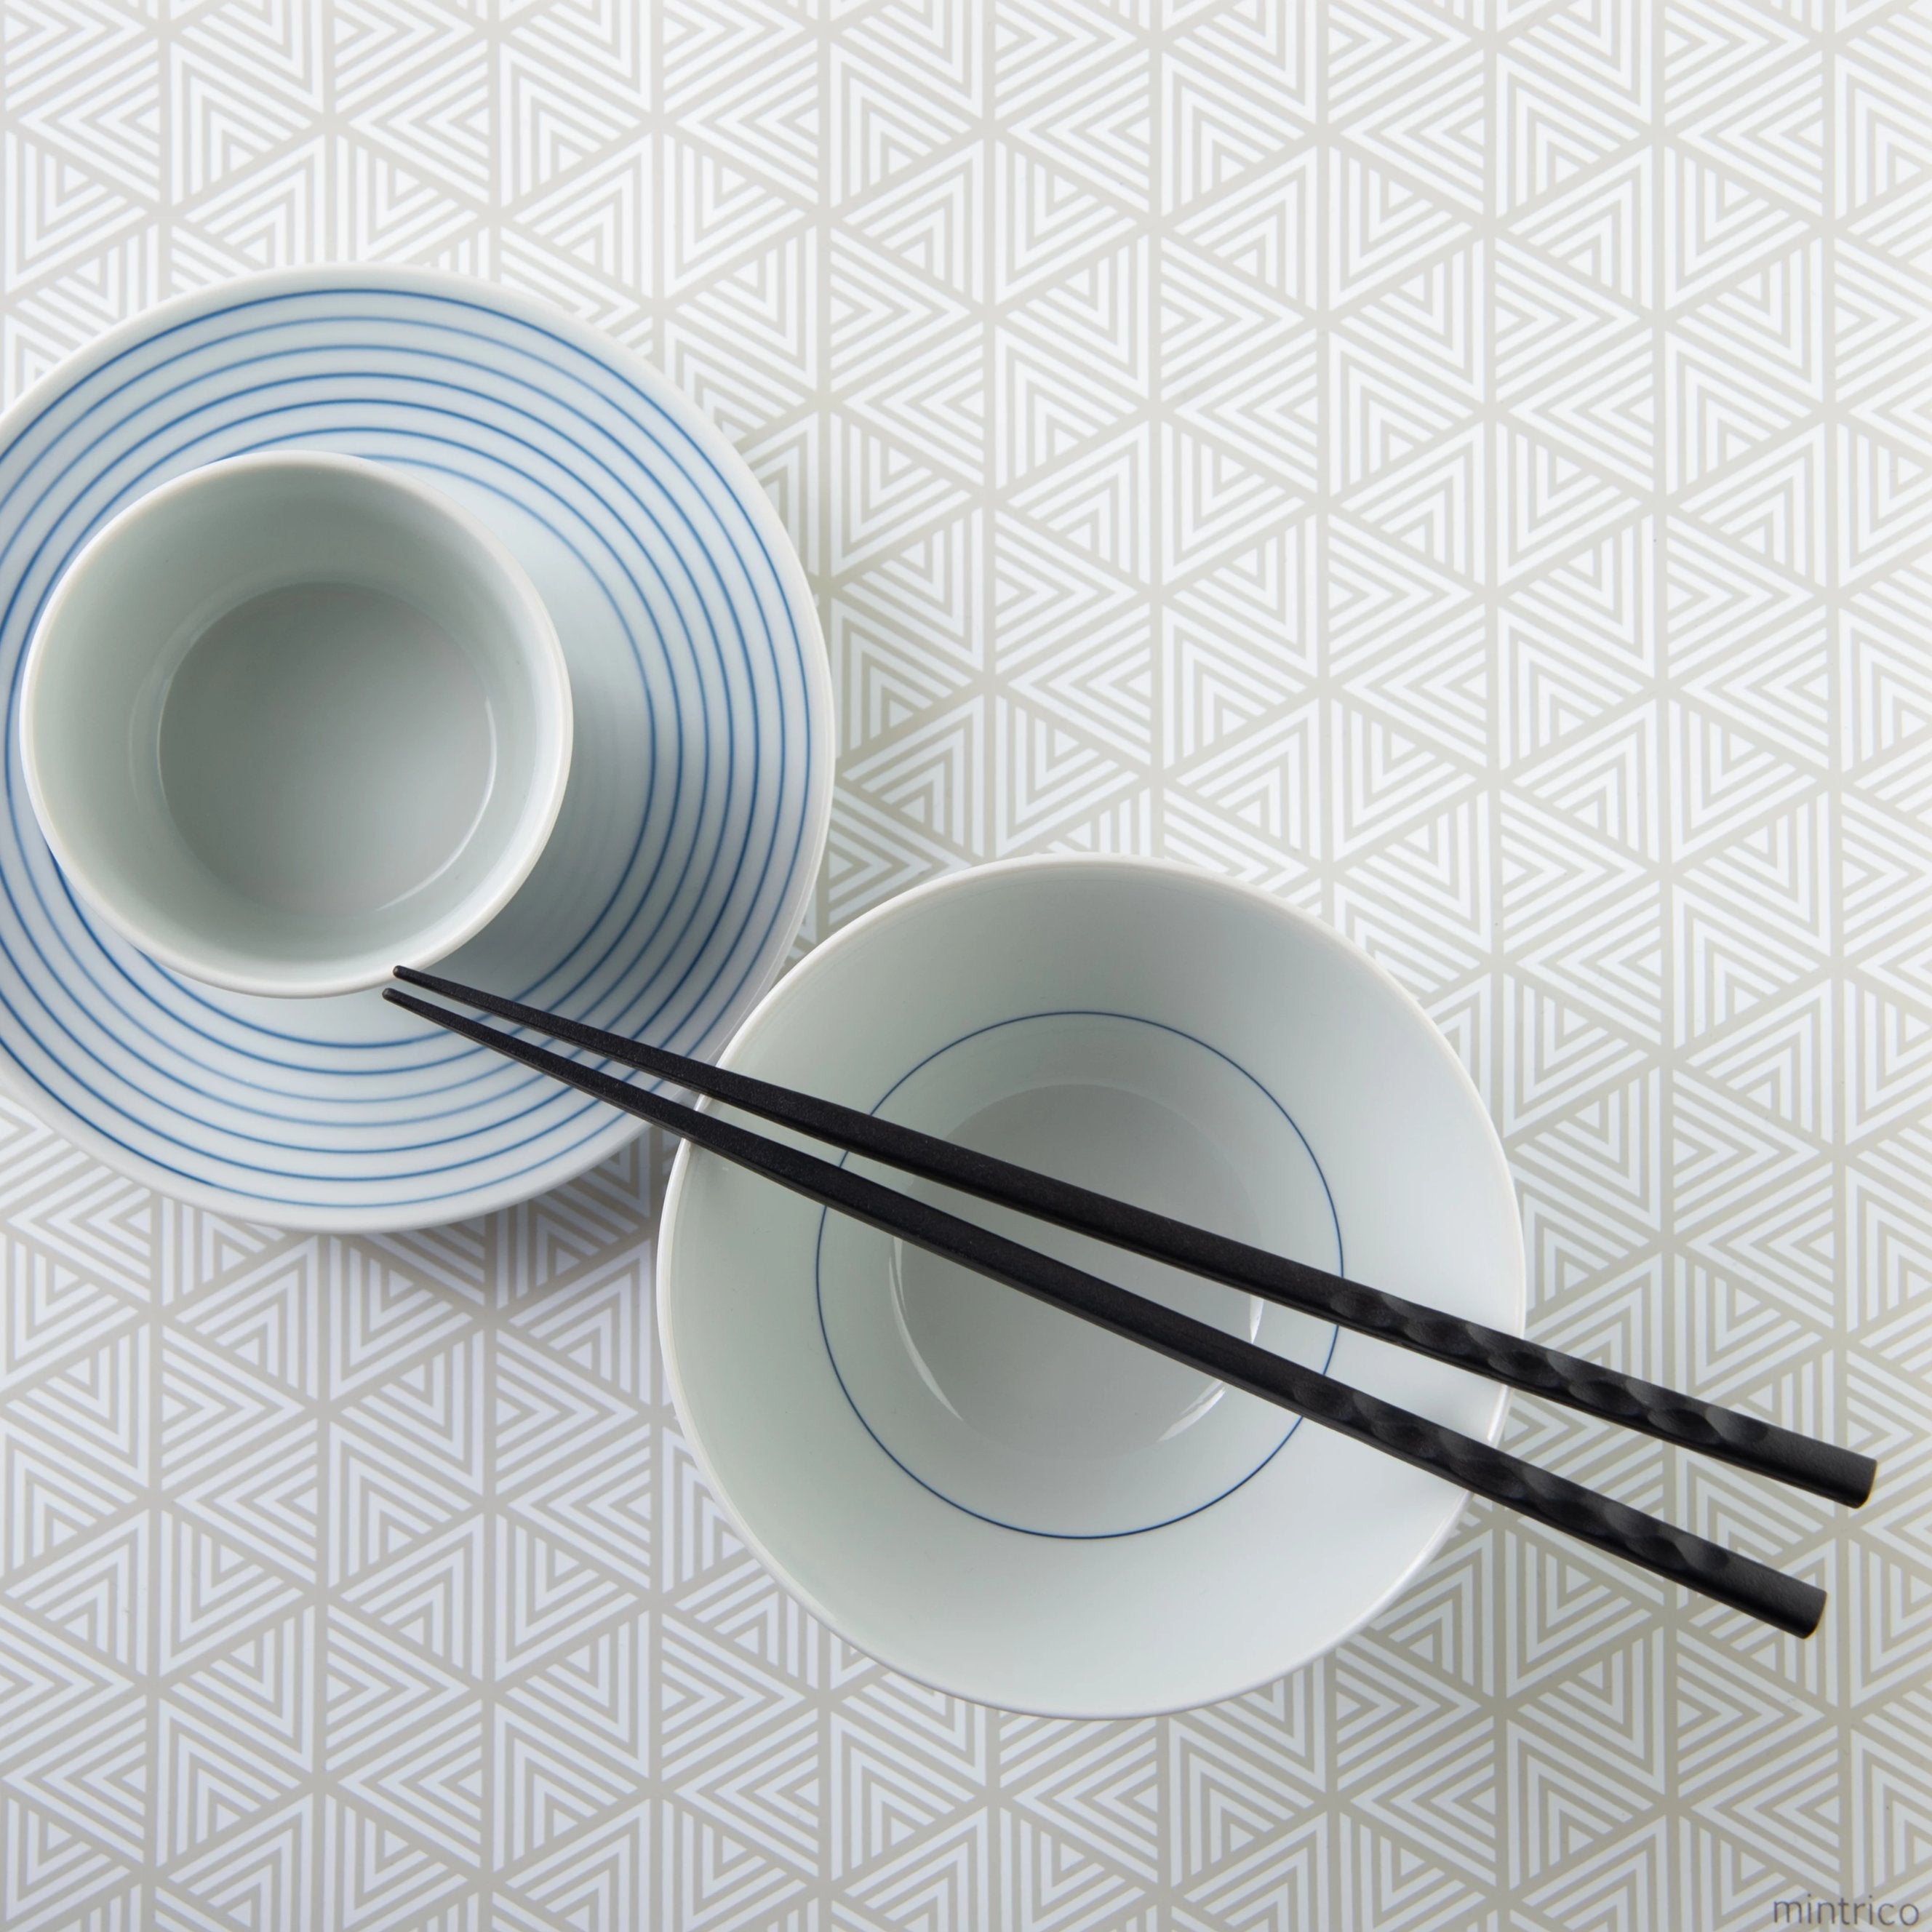 Chopsticks resting on top of bowl on placemat with white triangle pattern